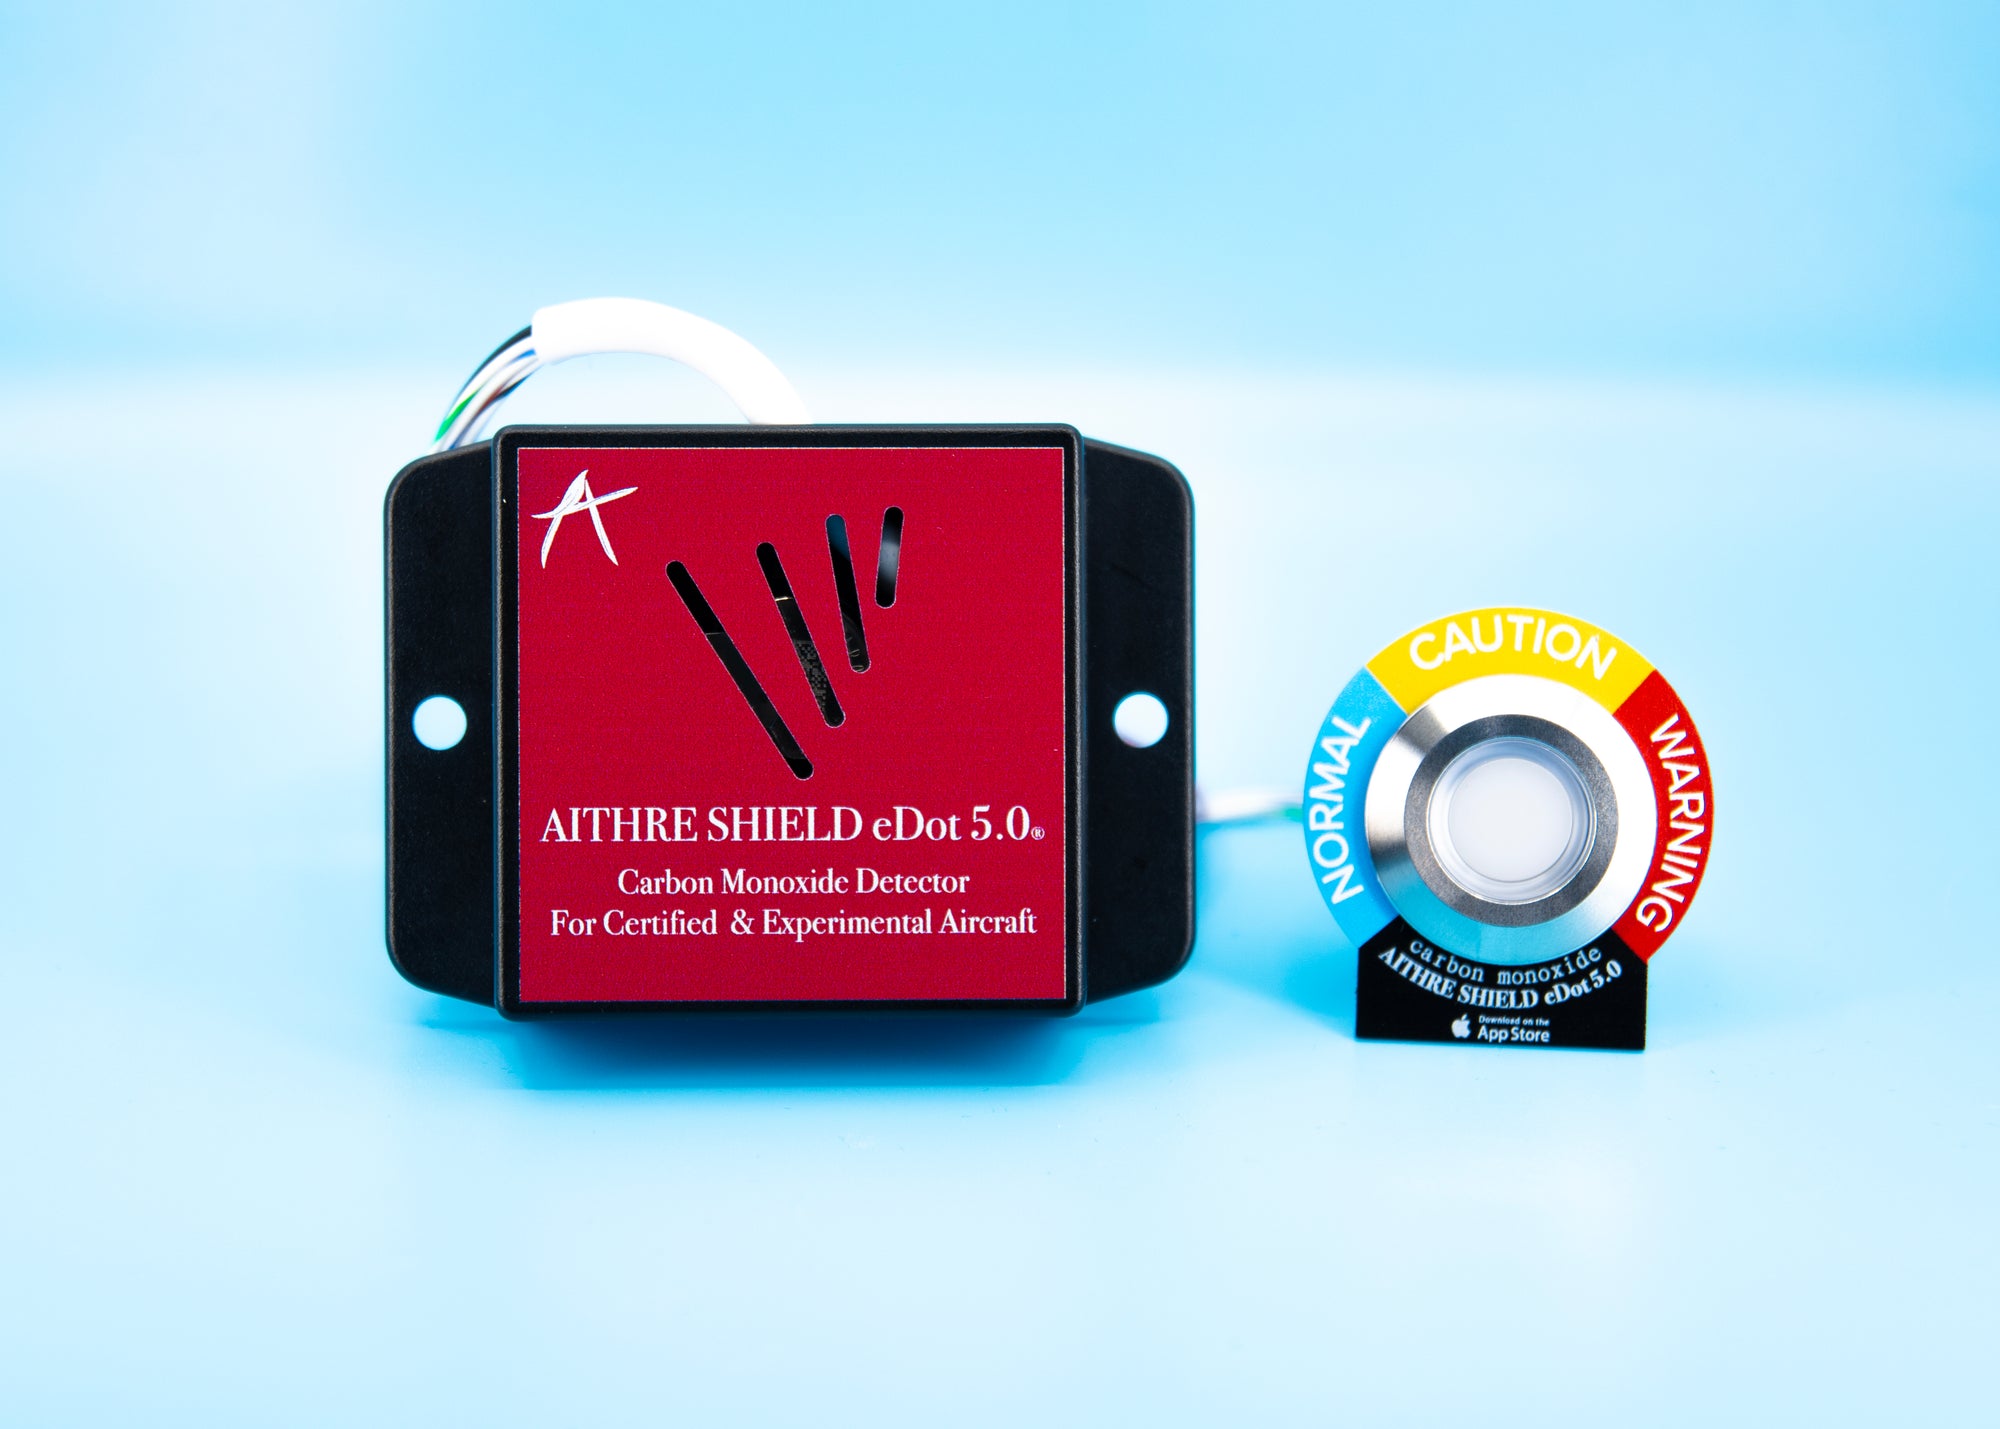 NEW PRODUCT LAUNCH!! Aithre Shield eDot 5.0 CO Detector - FAA Part 23 Approved - Panel LED indicator - with iOS App